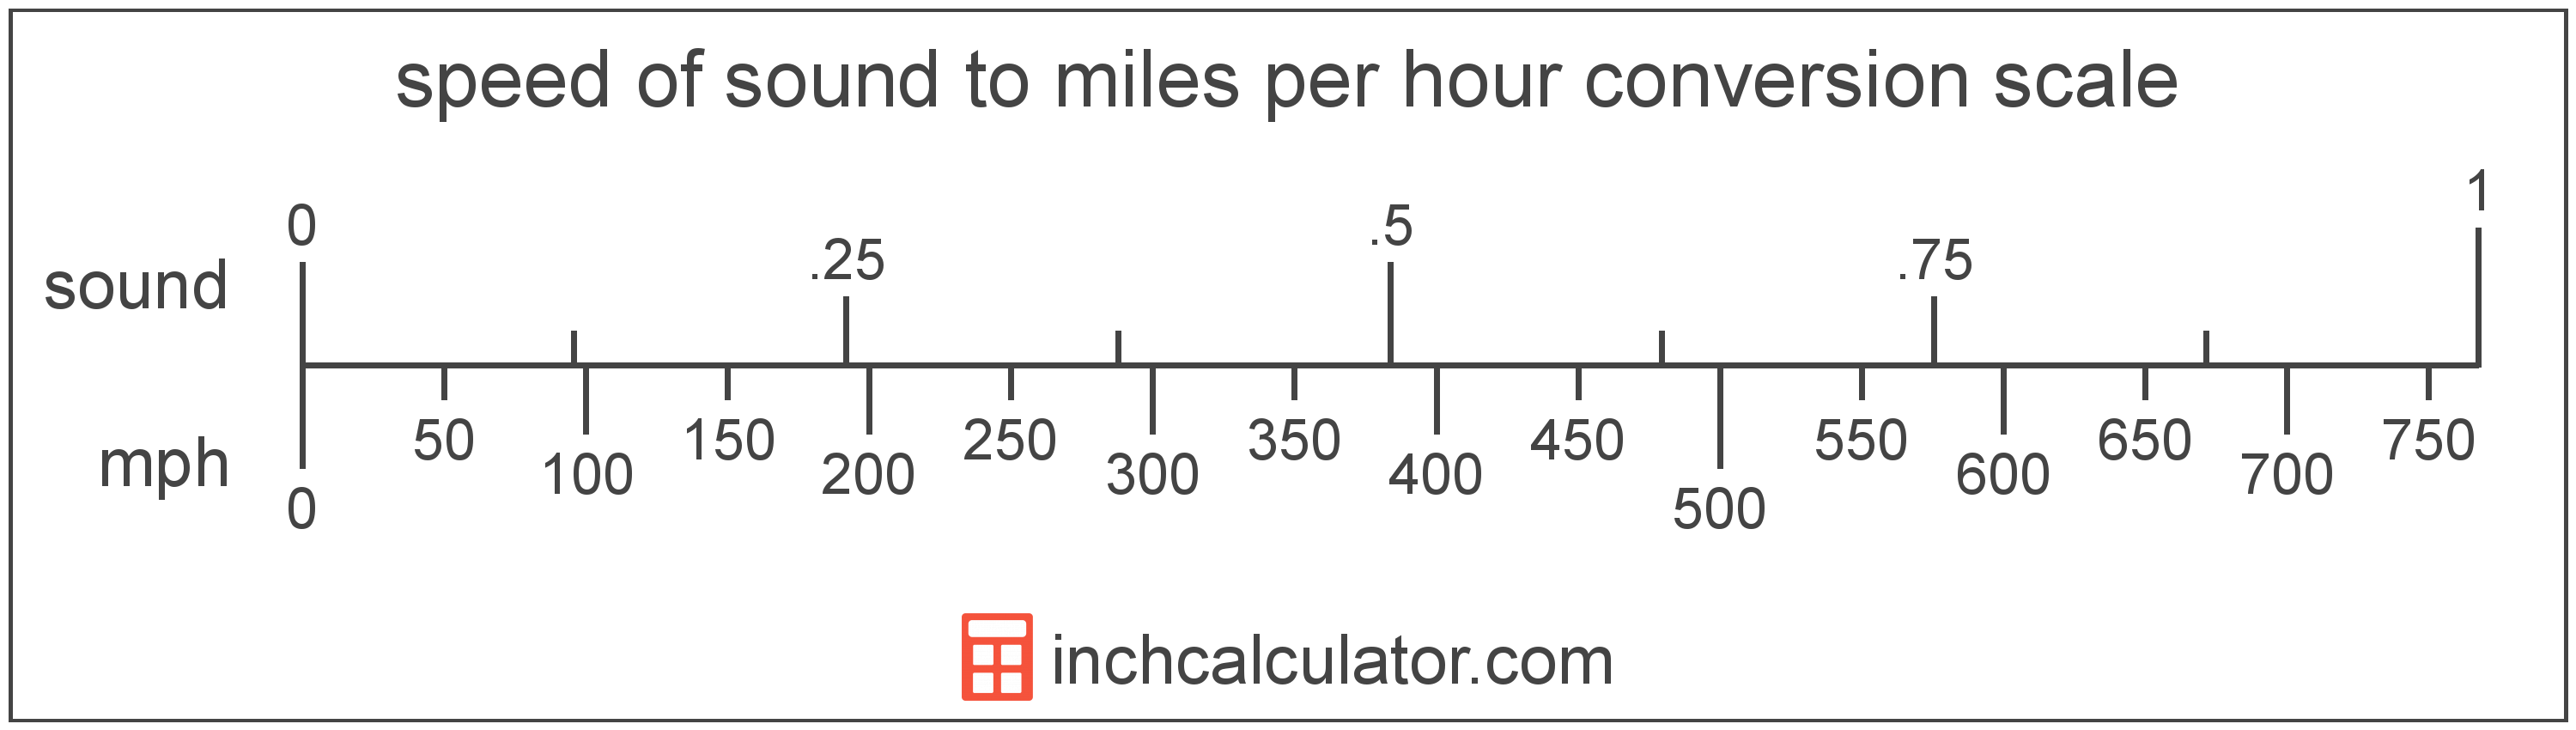 conversion scale showing speed of sound and equivalent miles per hour speed values